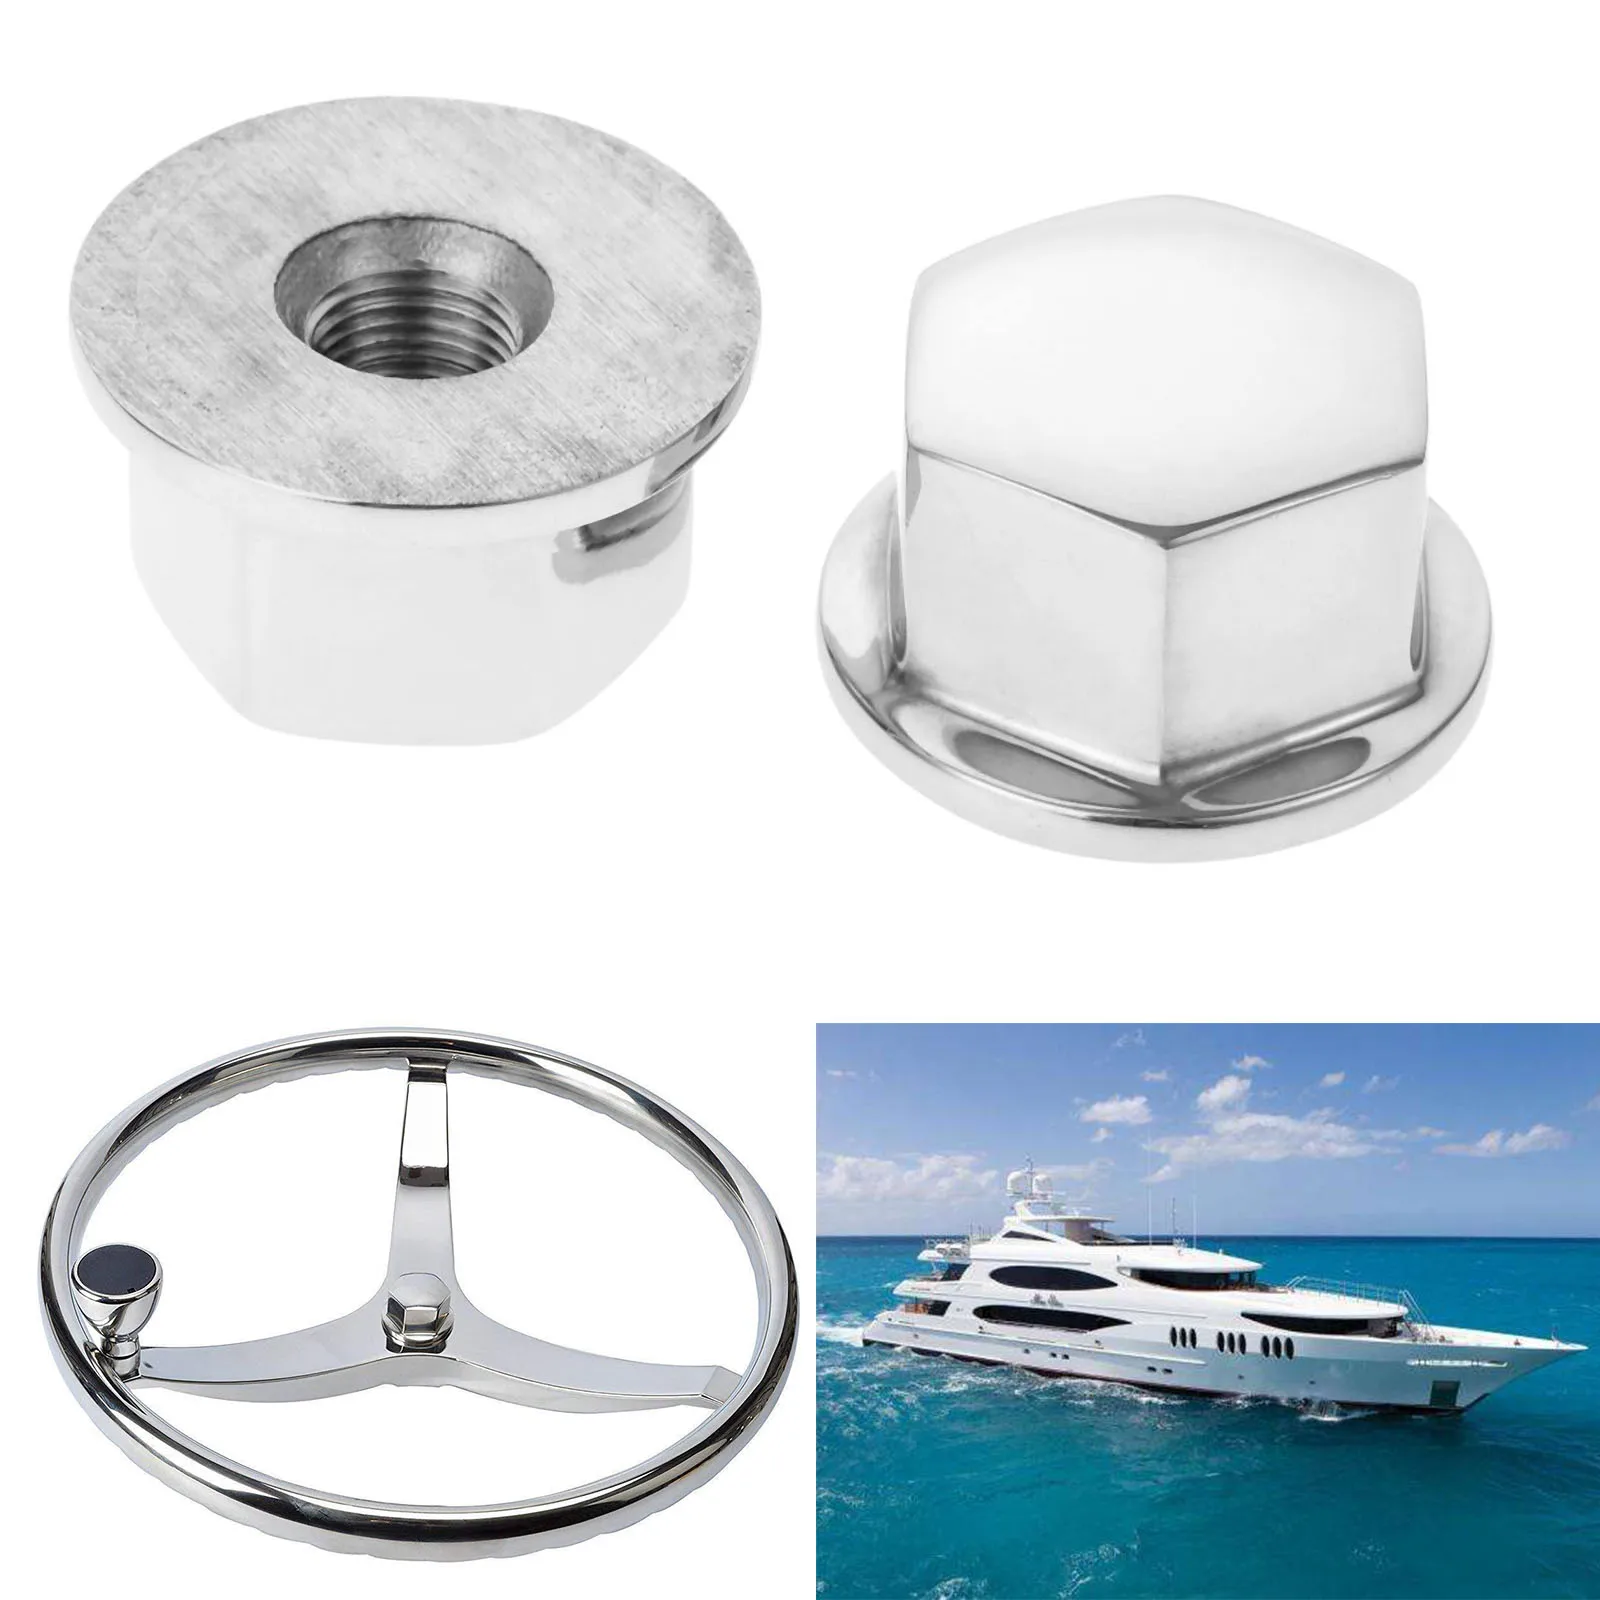 1/2in - 20 Thread Marine Grade 316 Stainless Steel Kayak Yacht Steering Wheel Mounting Center Hub Dome Nut For Boats Accessories